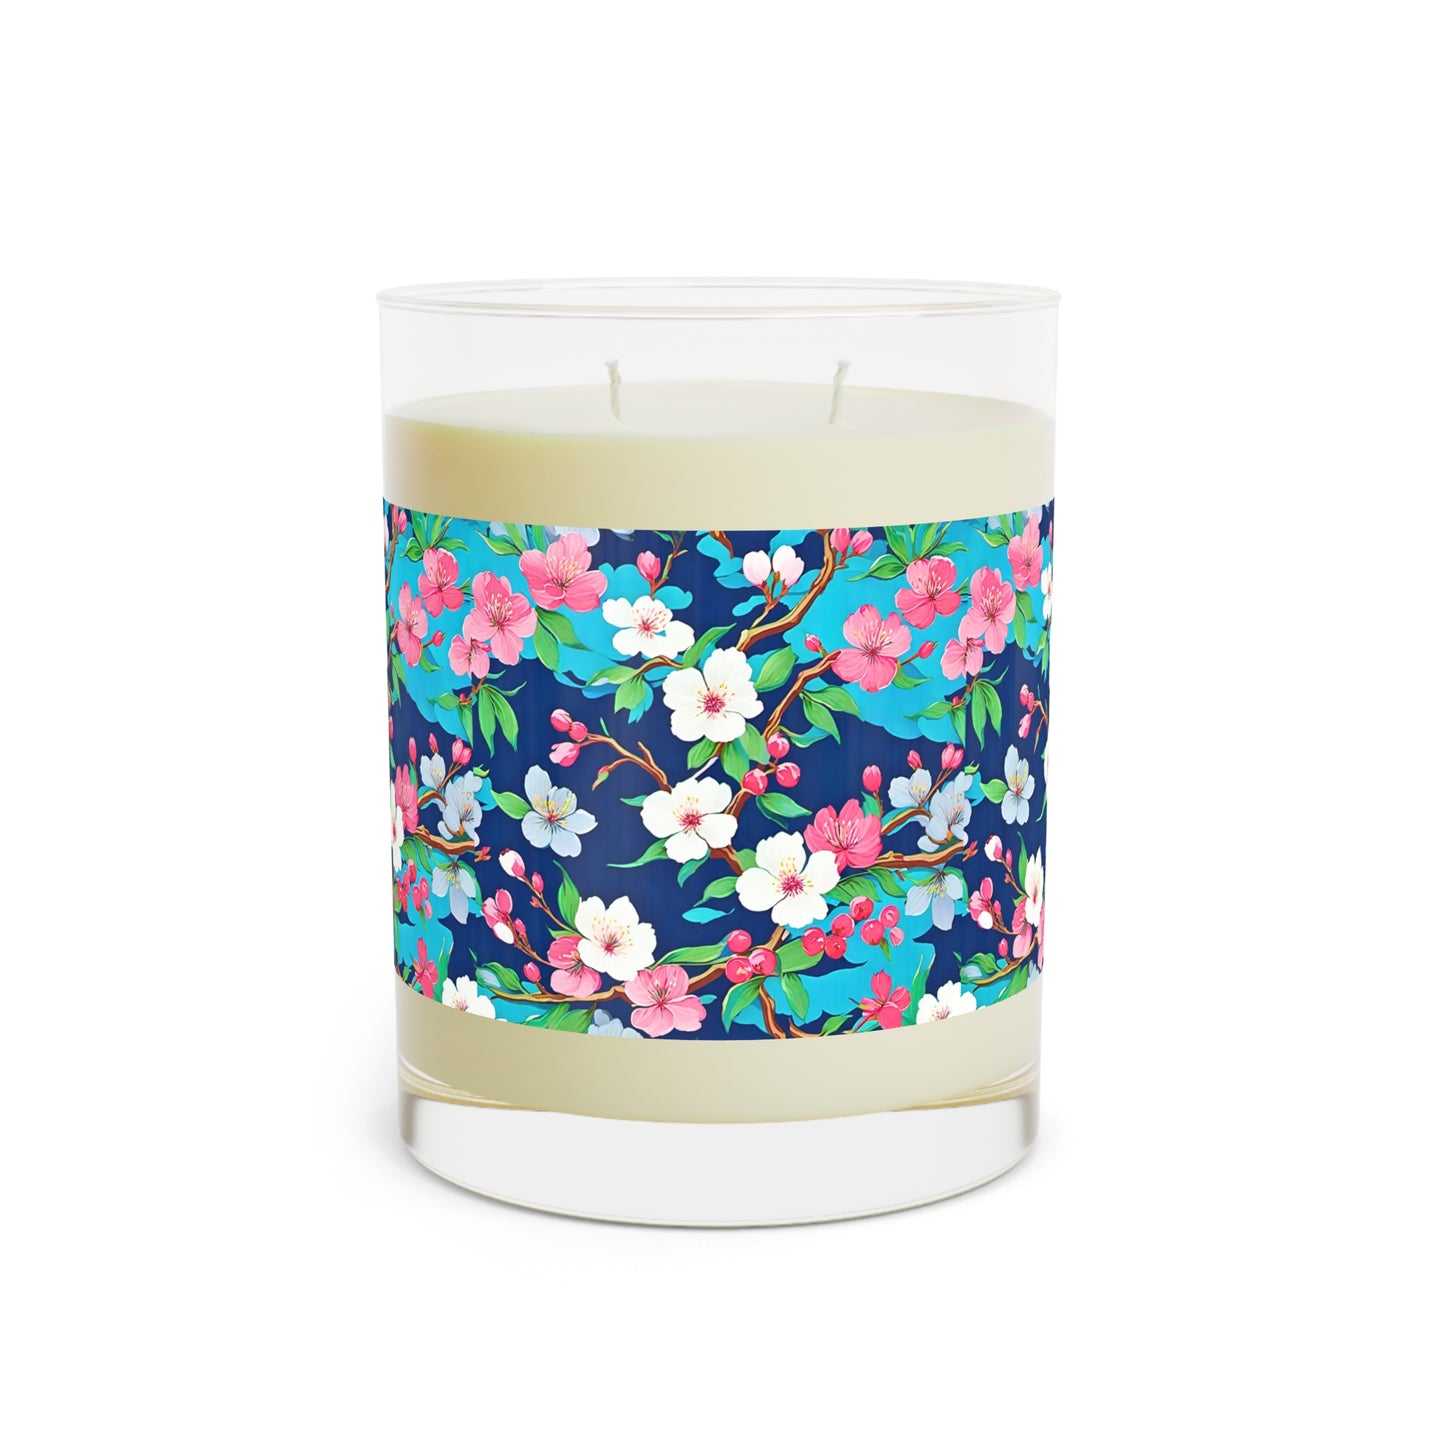 Cherry Blossoms Japanese Floral Decorative Aromatherapy Natural Essential Oils Scented Accent Candle - Full Glass, 11oz